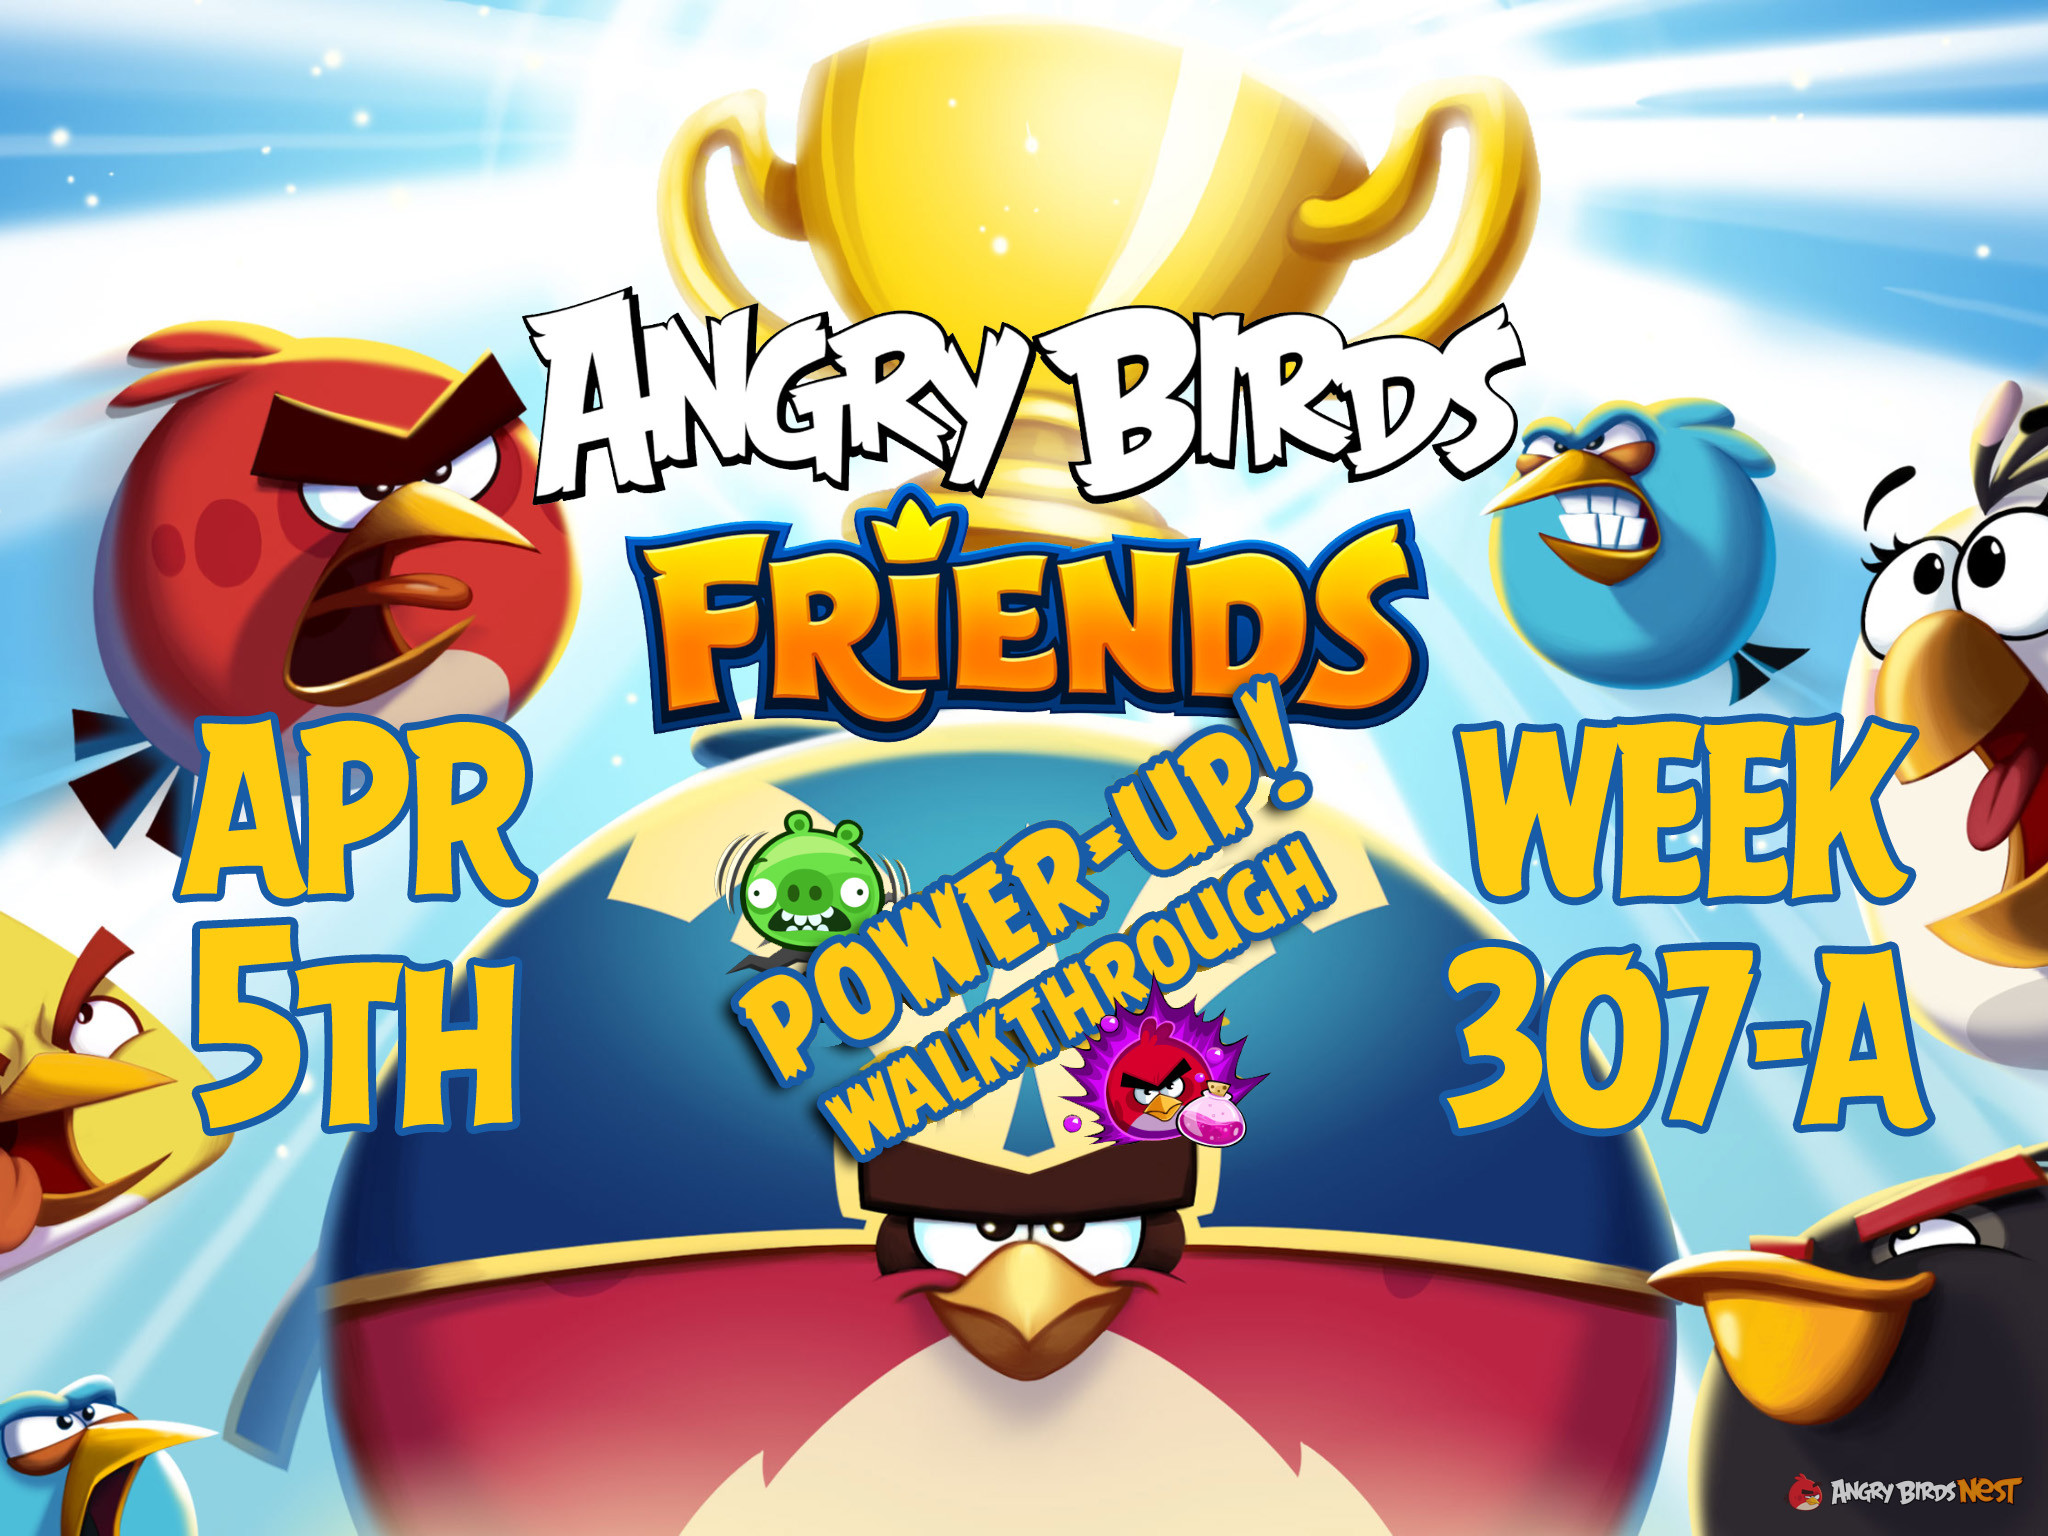 Angry Birds Friends Tournament Week 307-A Feature Image PU